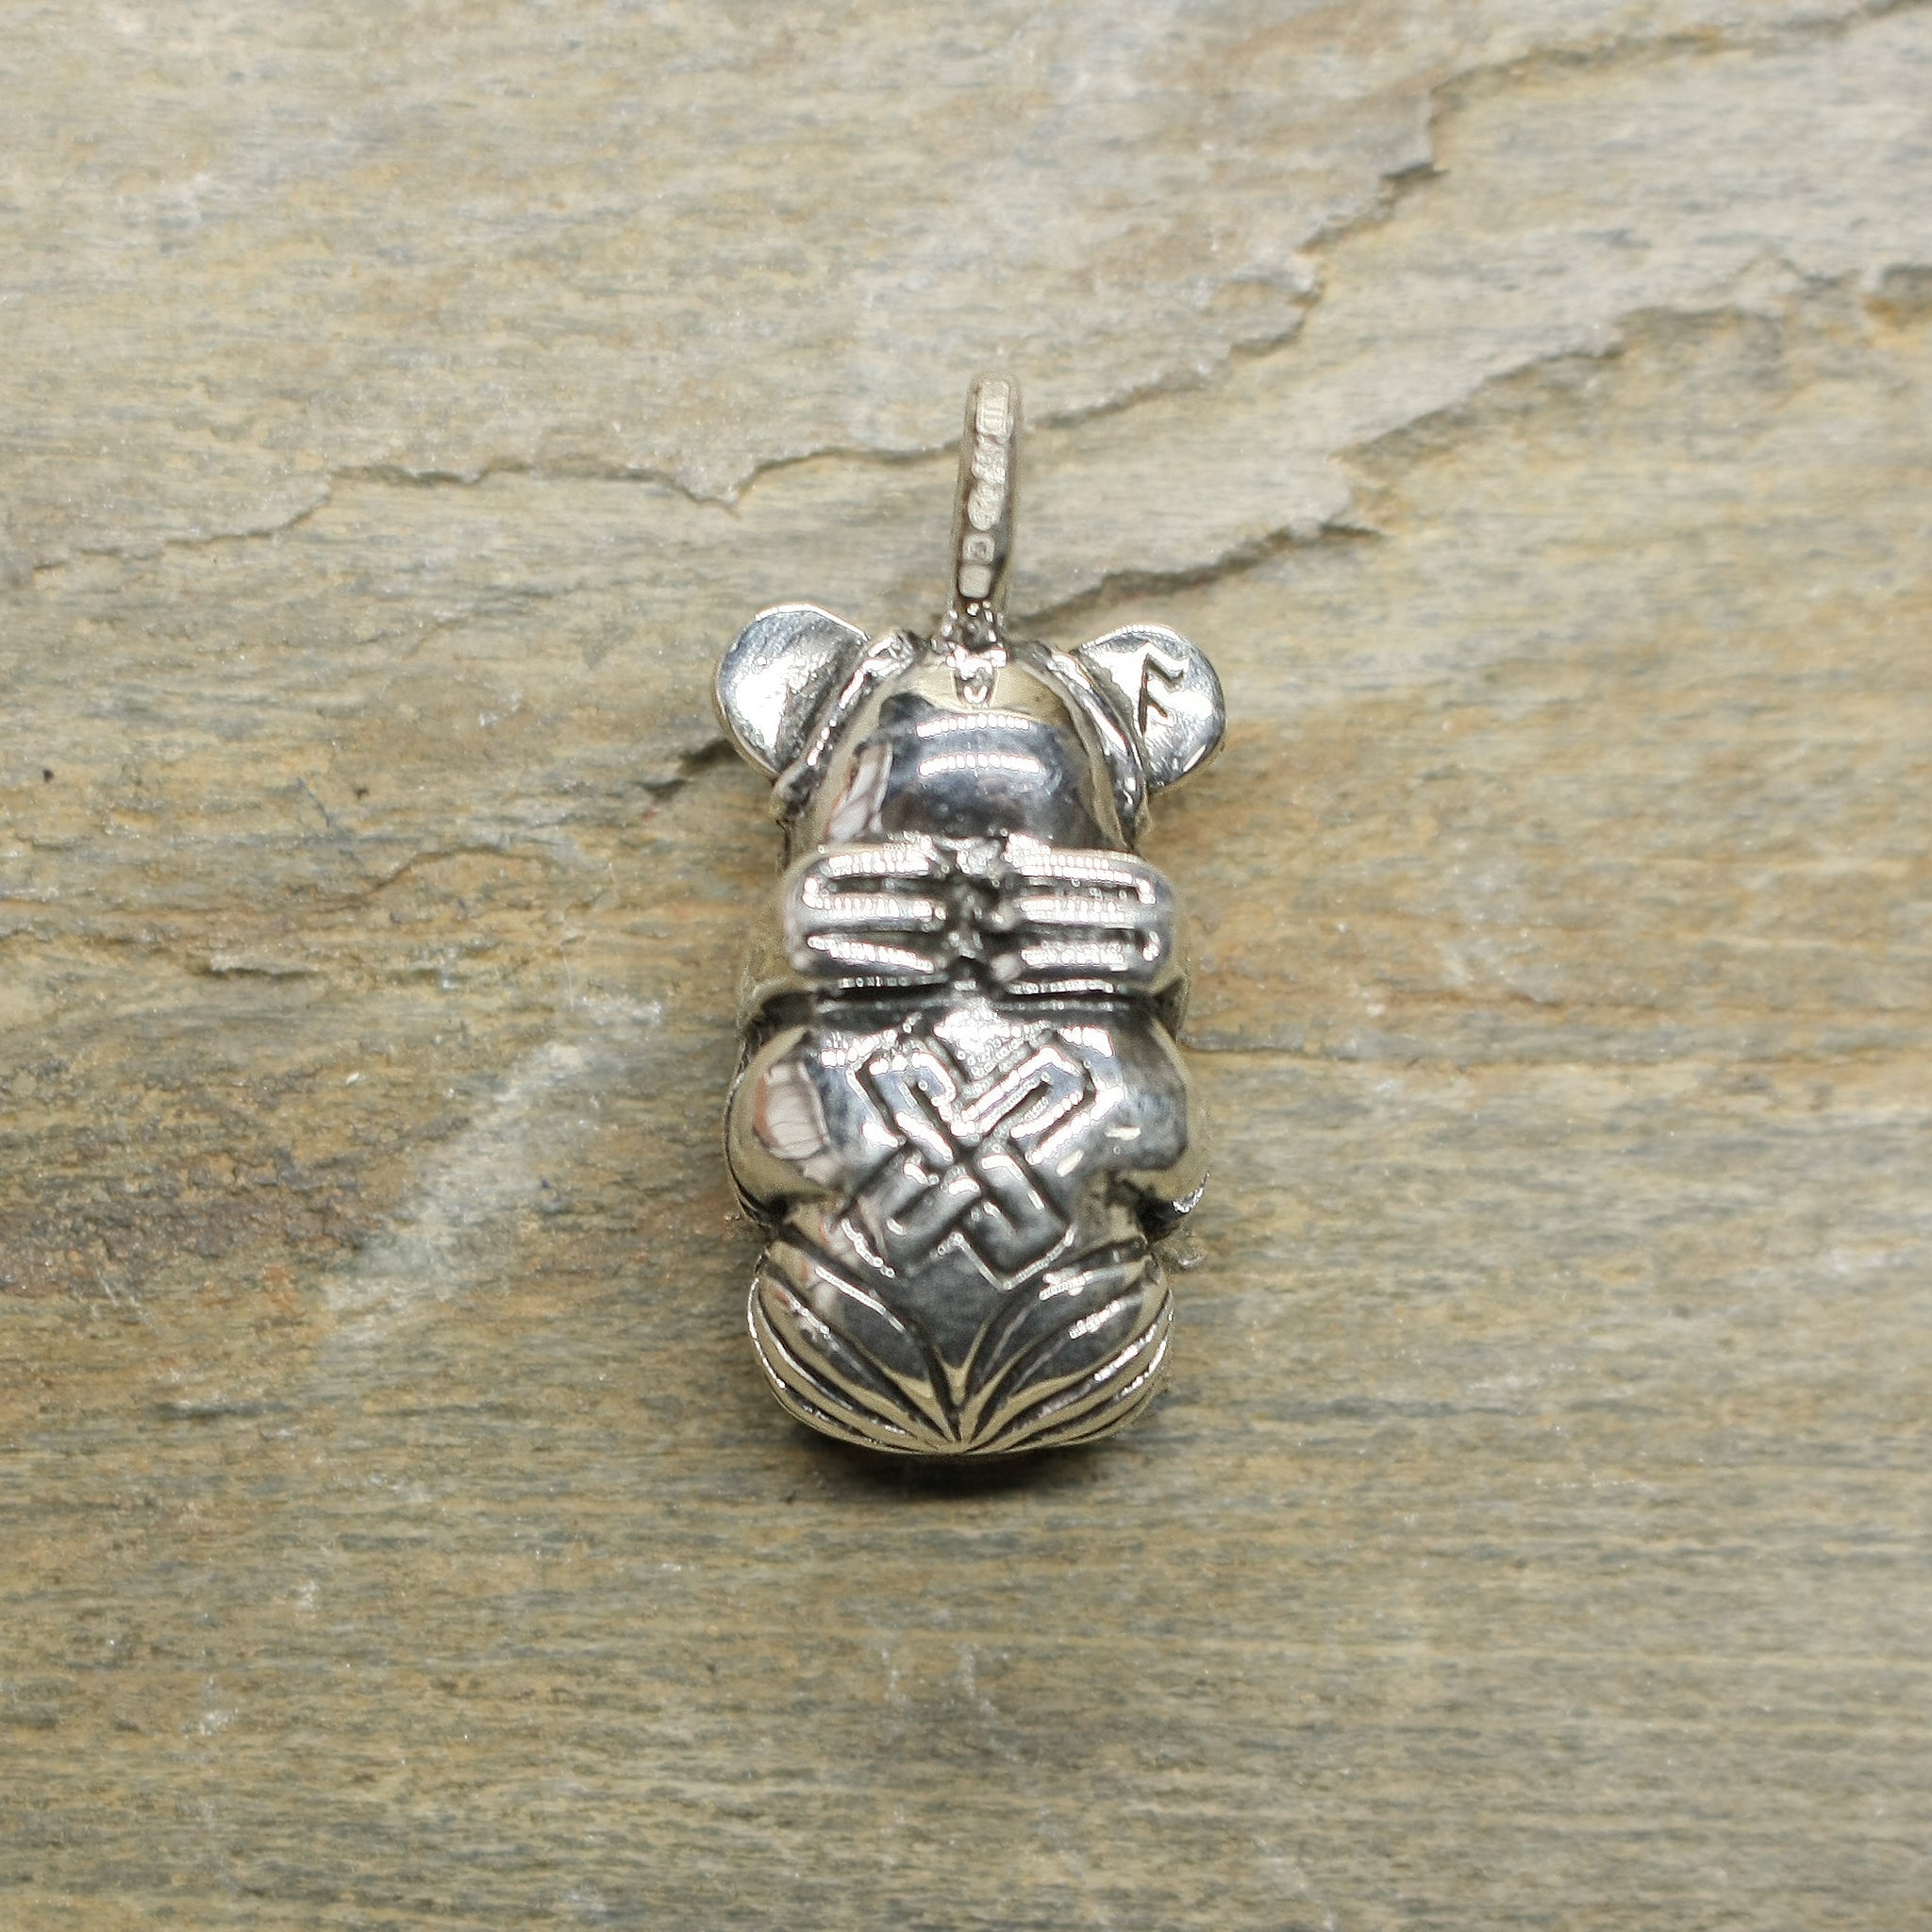 Silver Gripping Bear Pendant Replica from Norway on Rock - Back